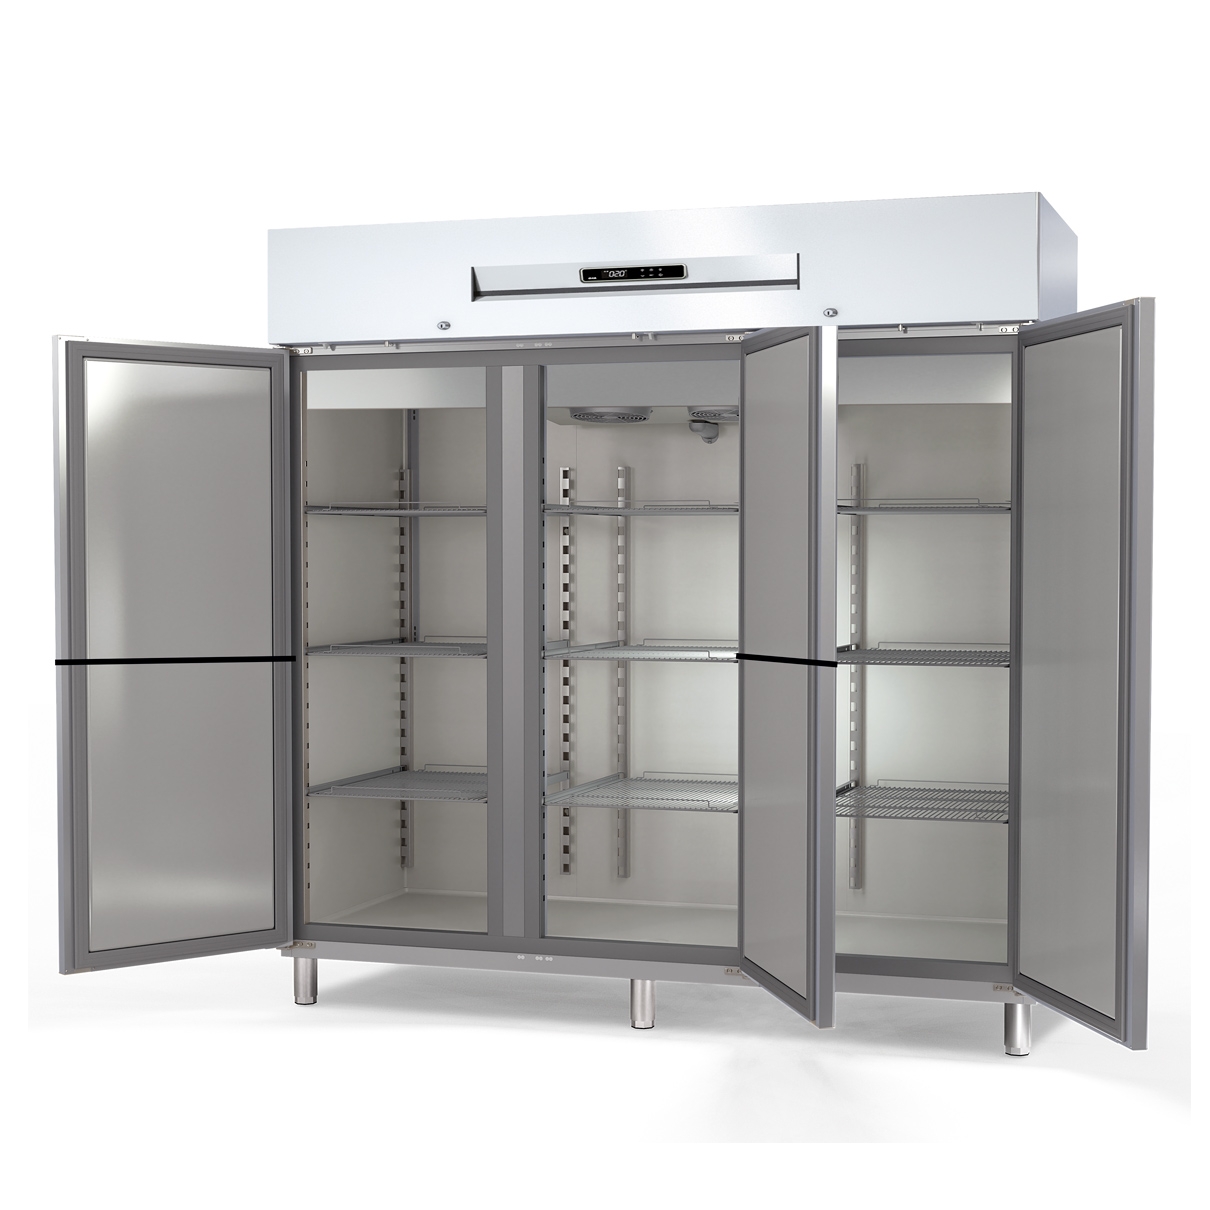 Gastronorm 2/1 Refrigerated Cabinet ARG-210-5